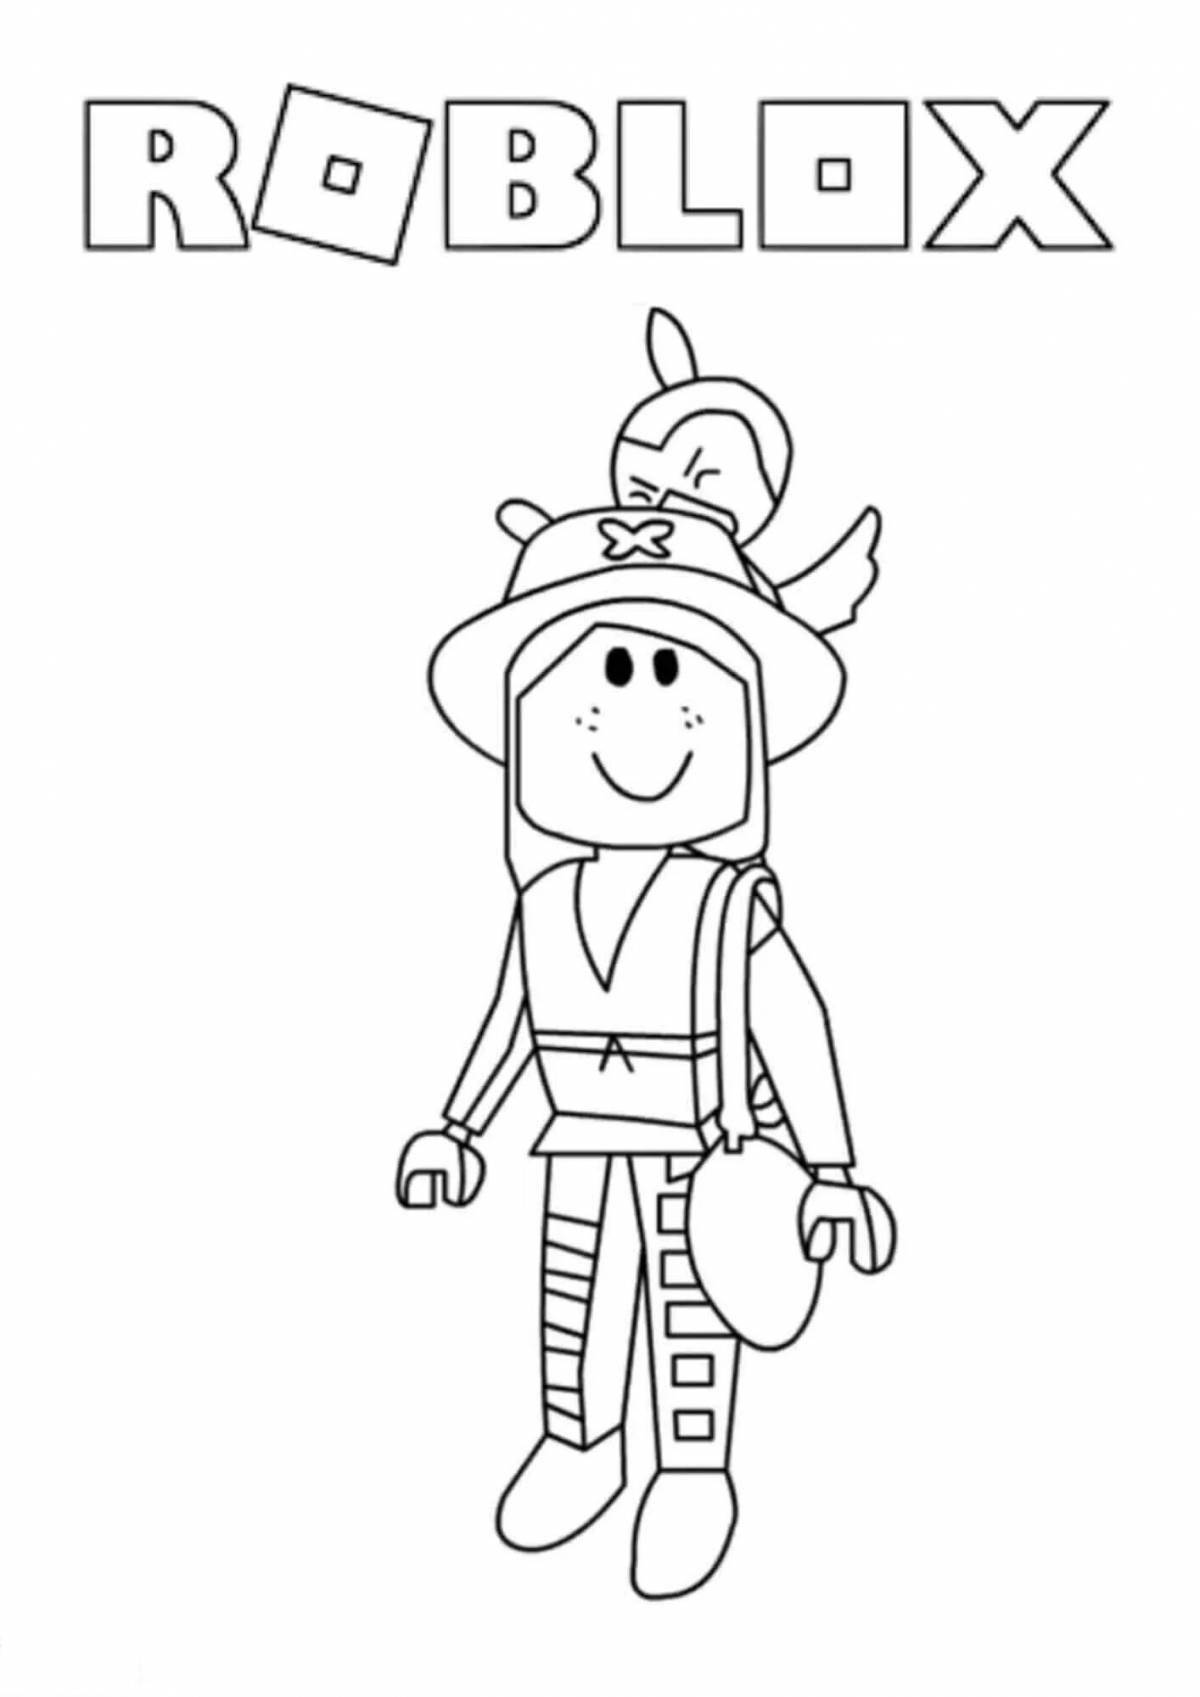 Colorful roblox coloring game